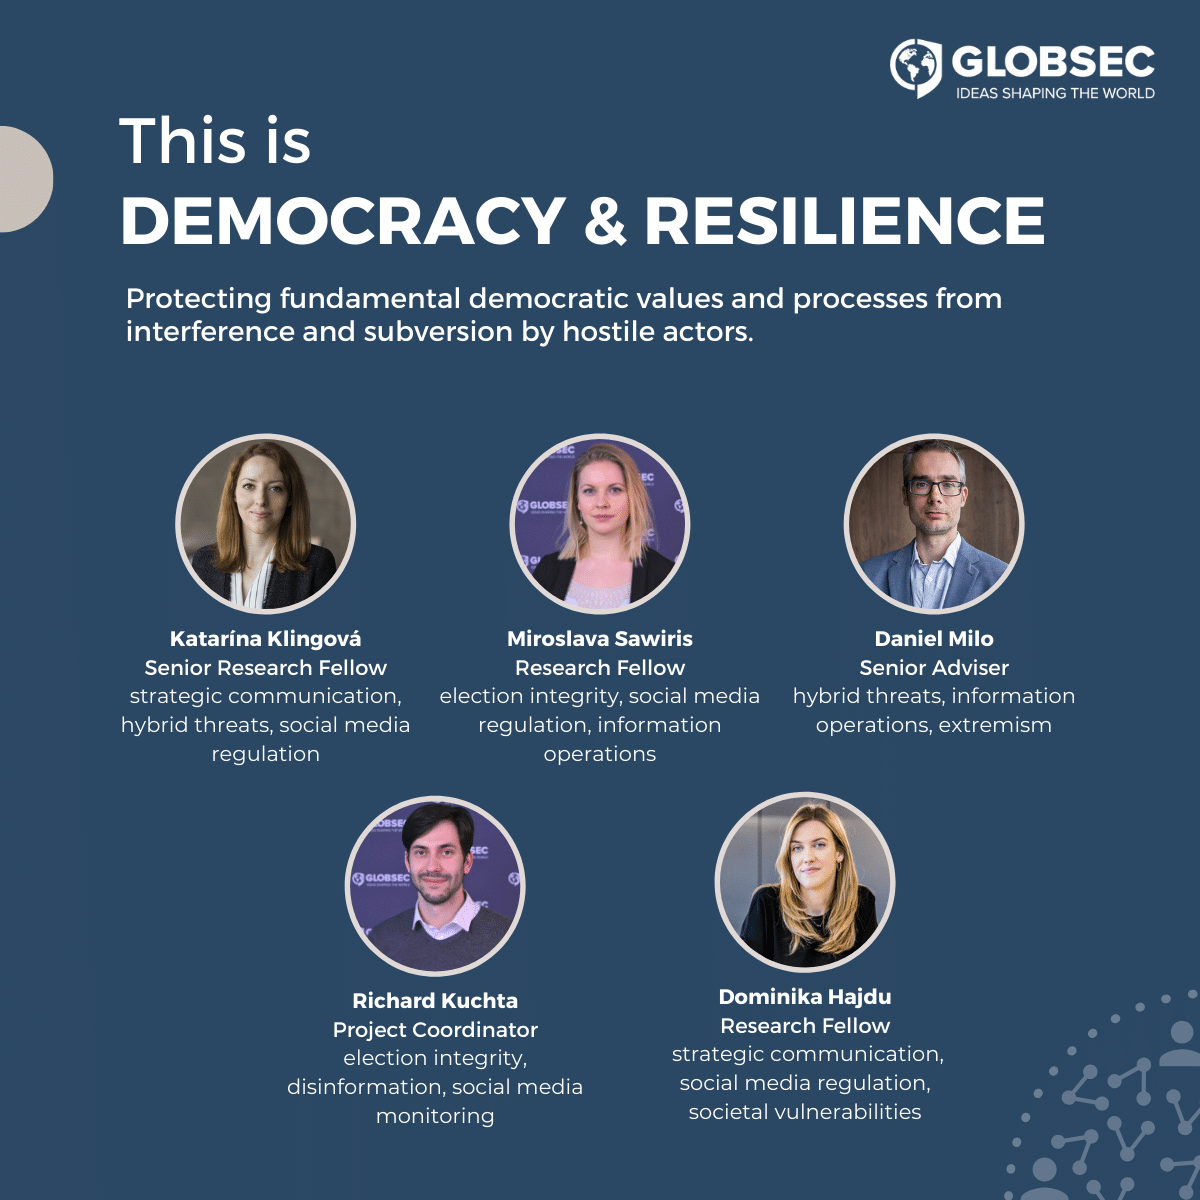 Members of GLOBSEC's Democracy & Resilience programme